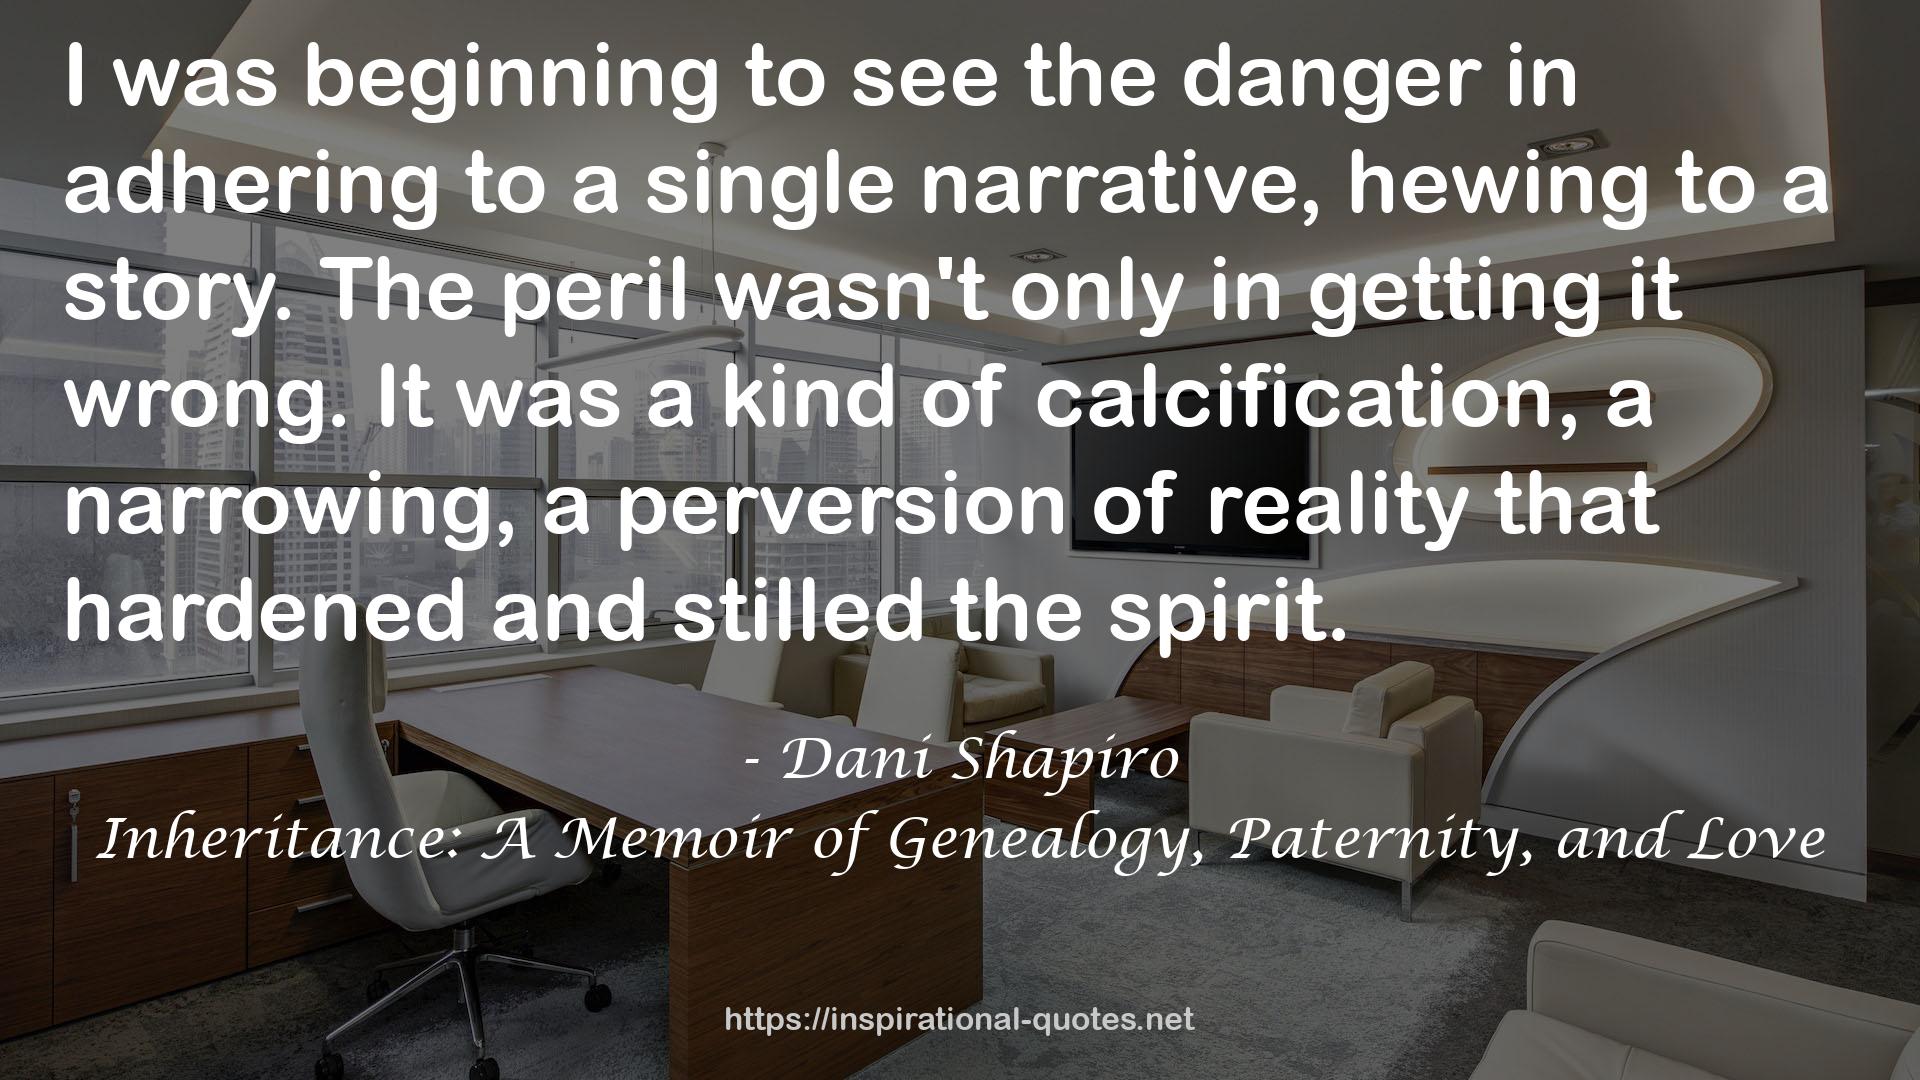 Inheritance: A Memoir of Genealogy, Paternity, and Love QUOTES